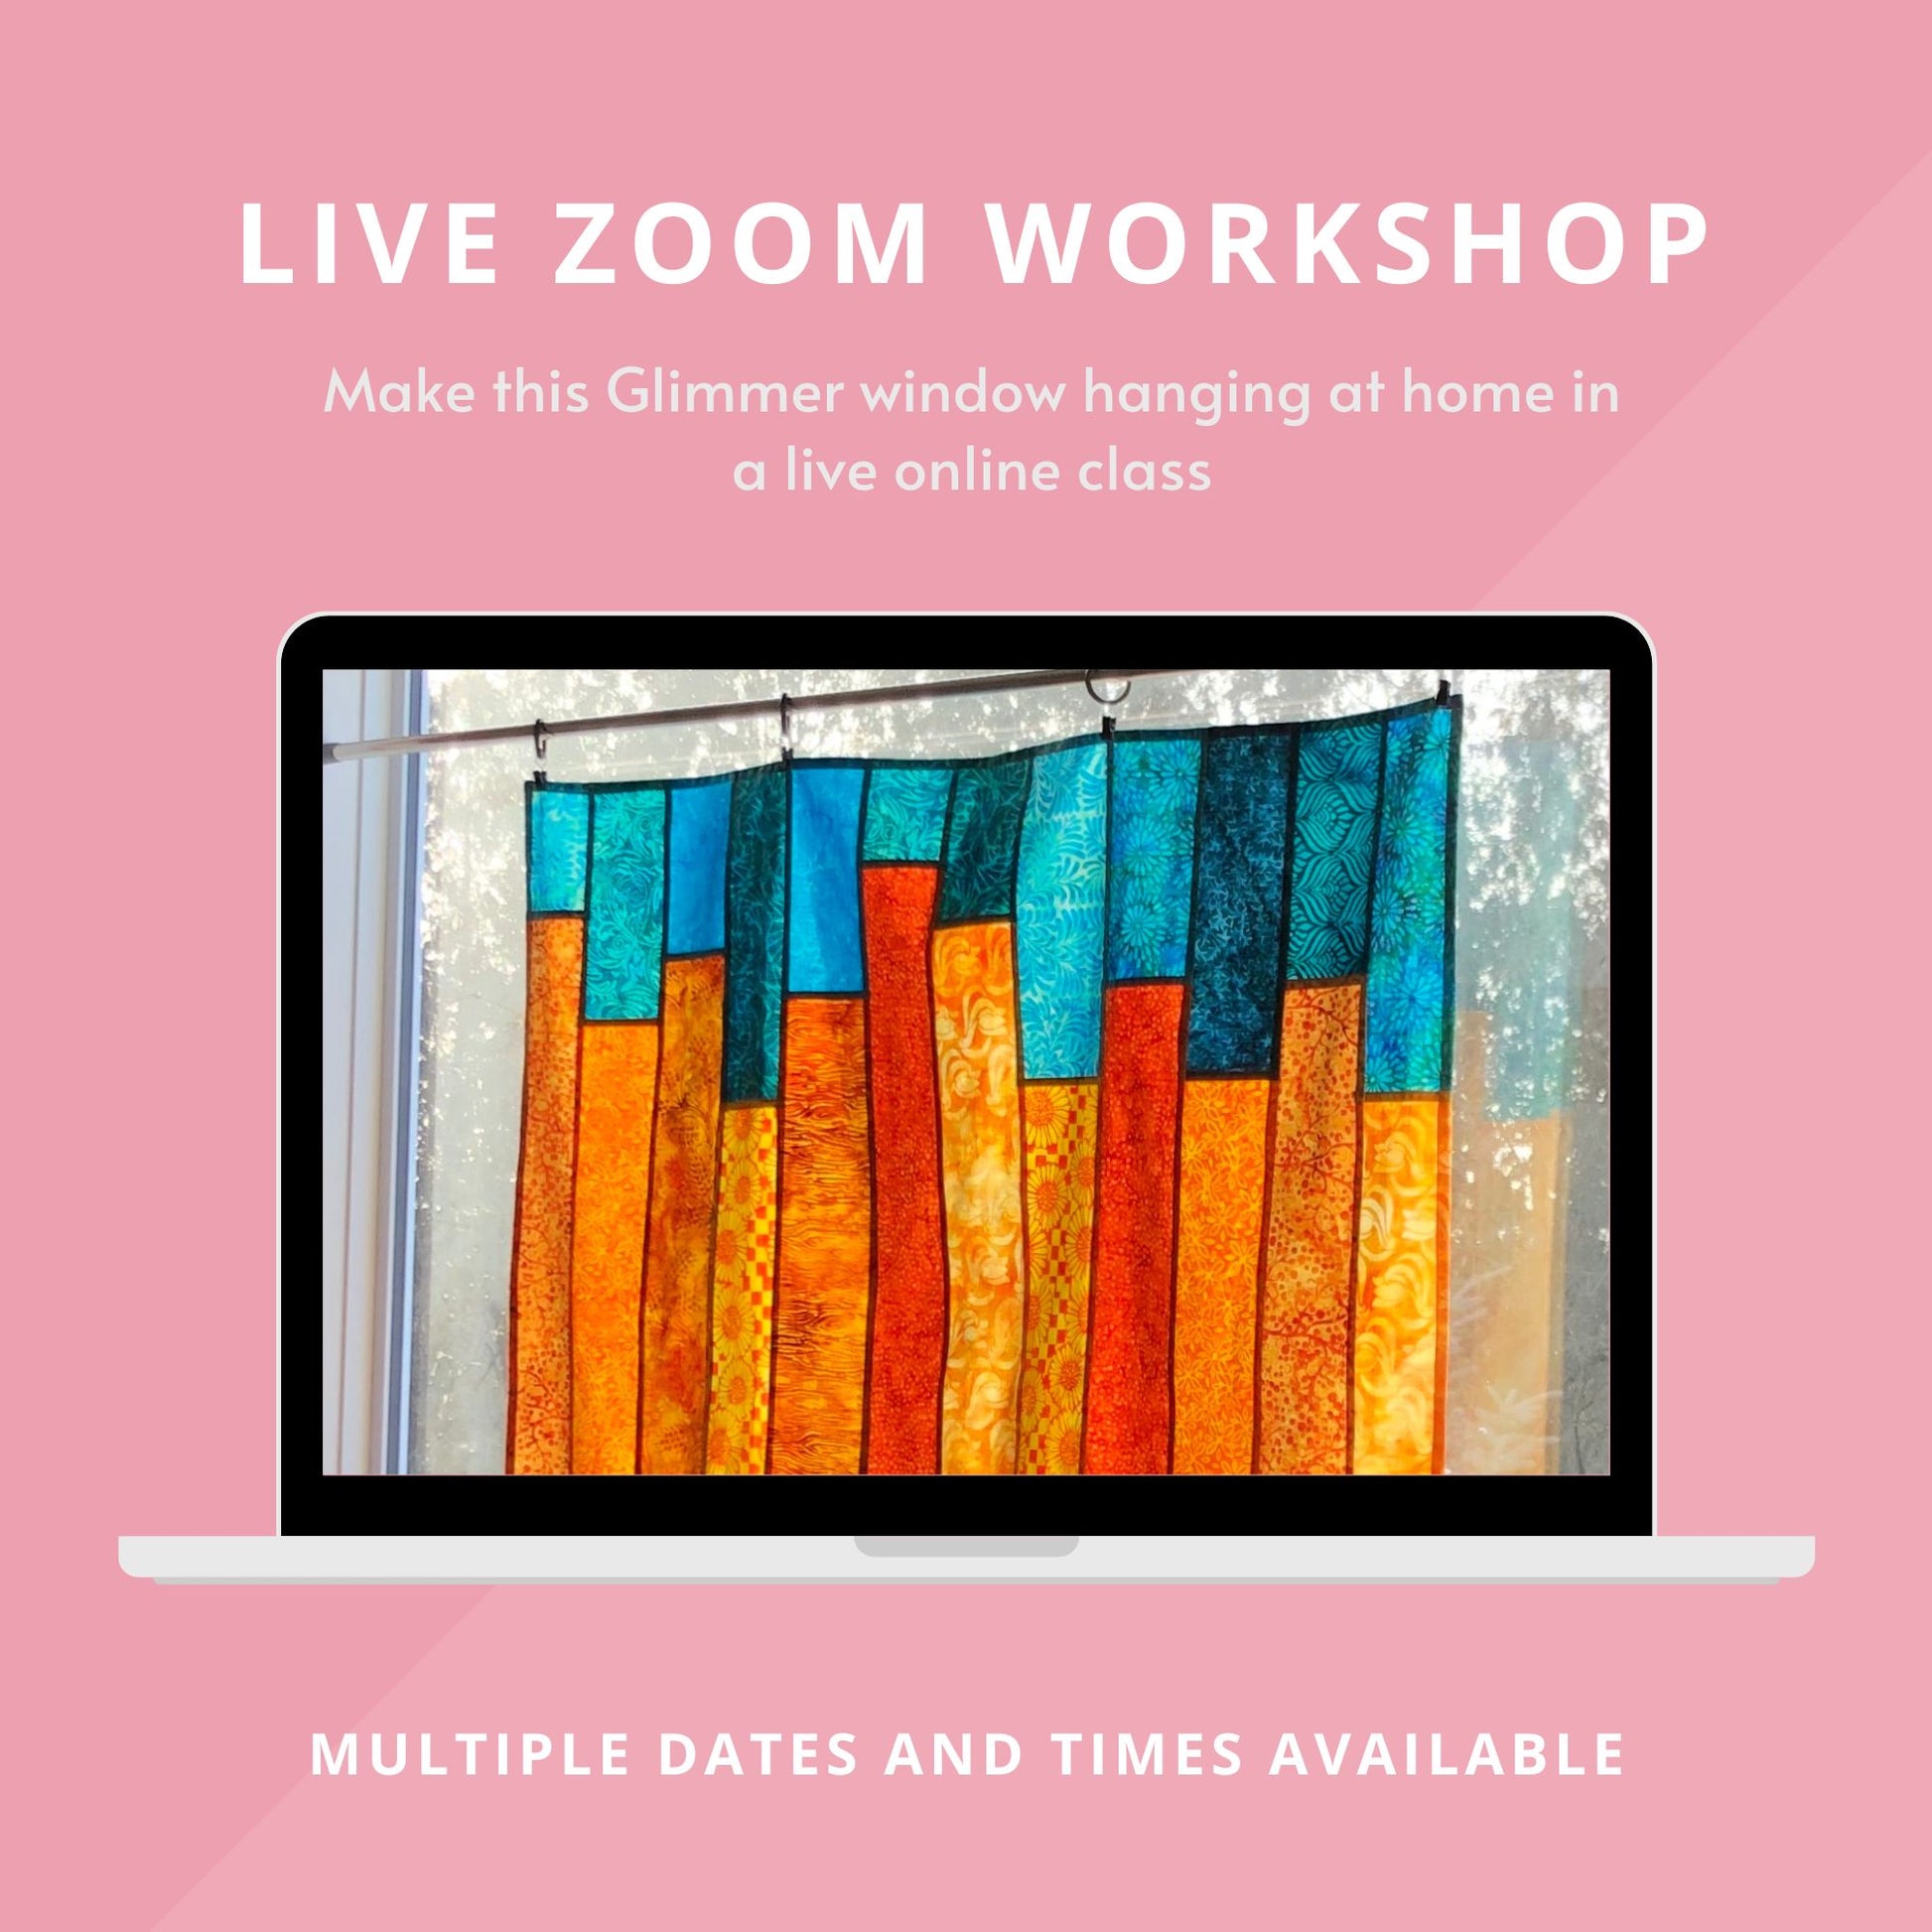 graphic for Glimmer window hanging live Zoom workshop by Epida Studio and Designs.